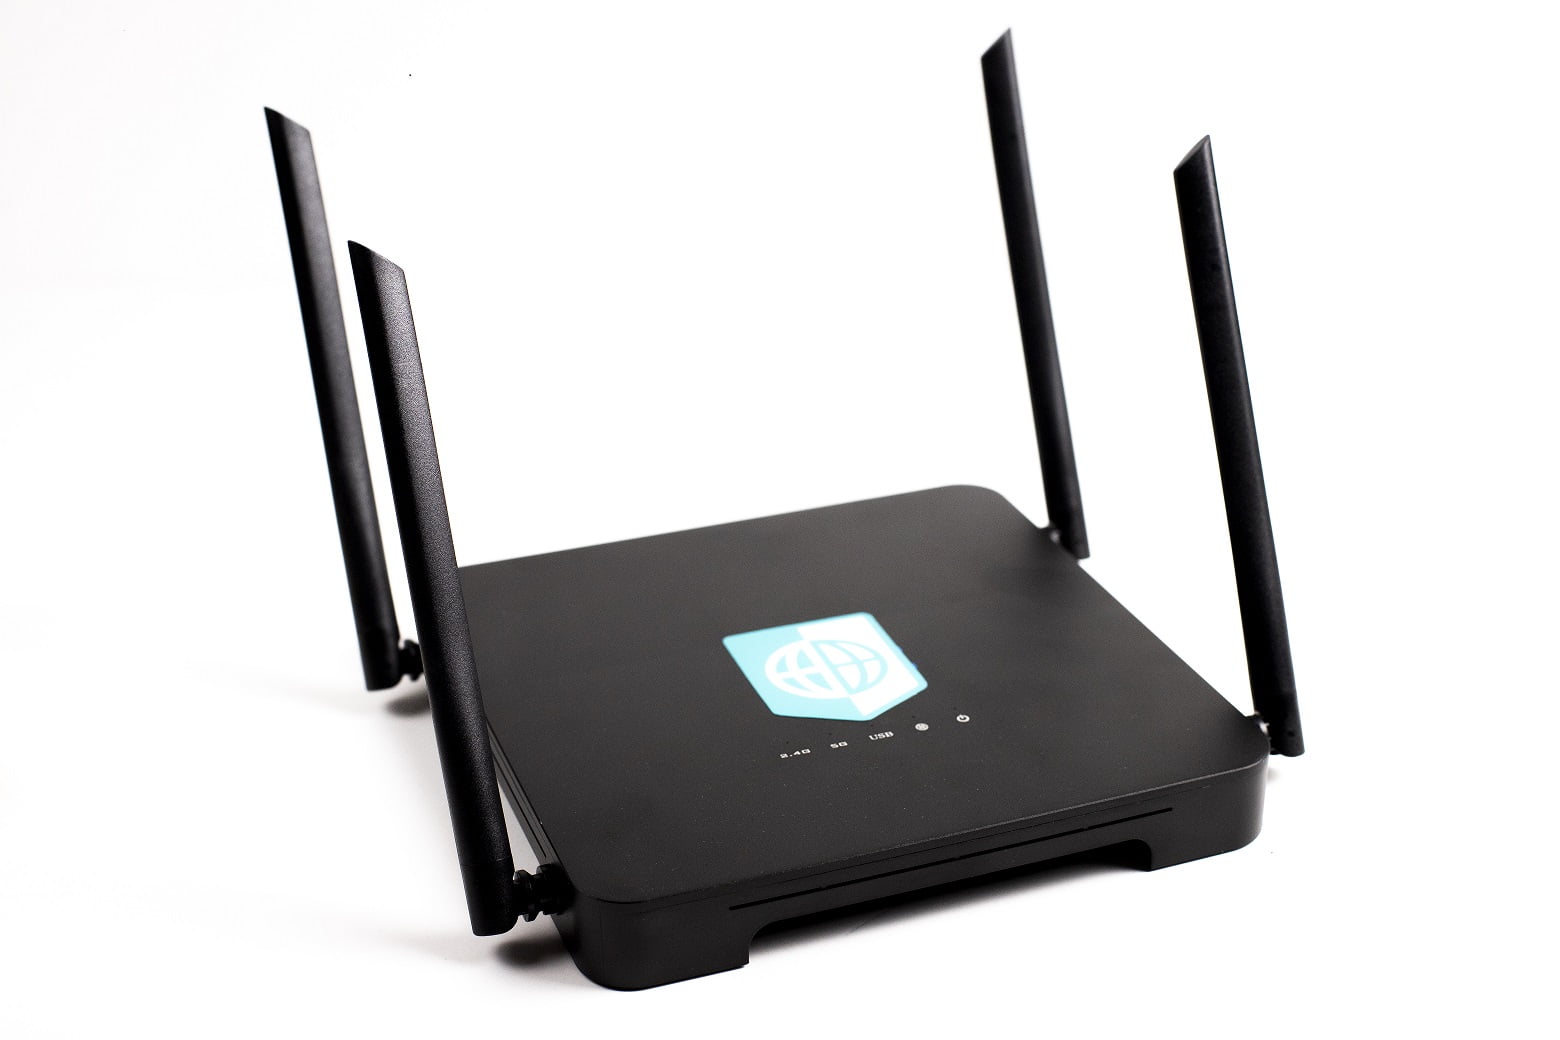 The CleanerNet Safe Internet Gigabit WiFi Router with Bark in-Home Service Included | Parental Controls, Filter Web Sites & Apps, Limit Online Games & Streaming Times - Walmart.com